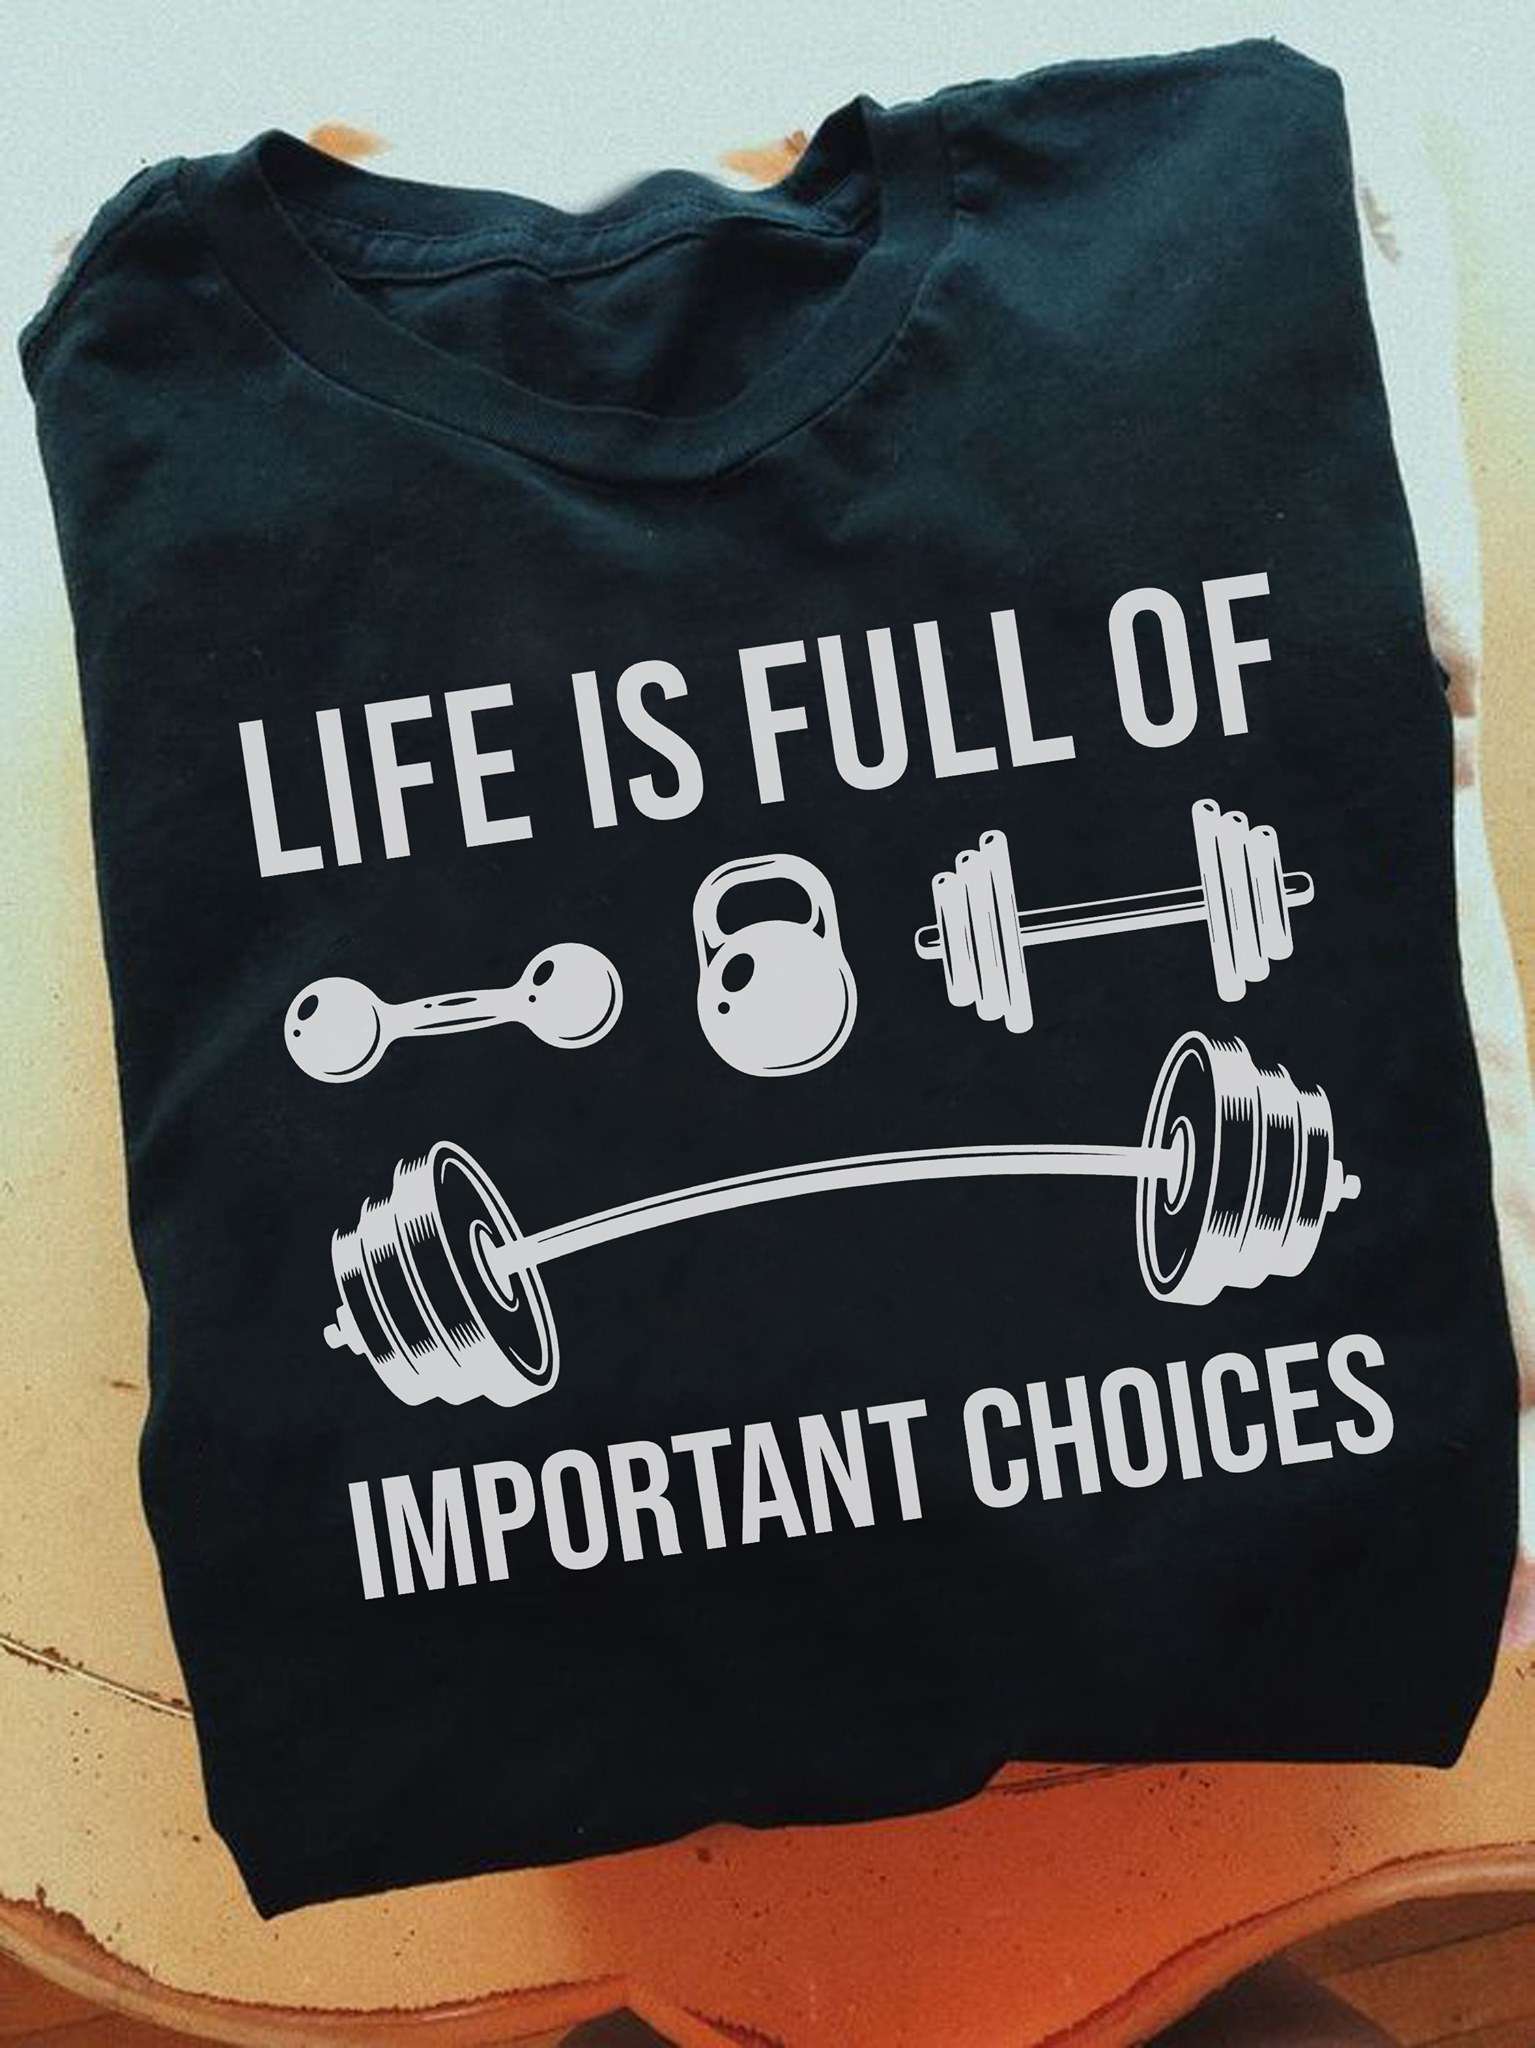 Gym Equipment - Life is full of important choices